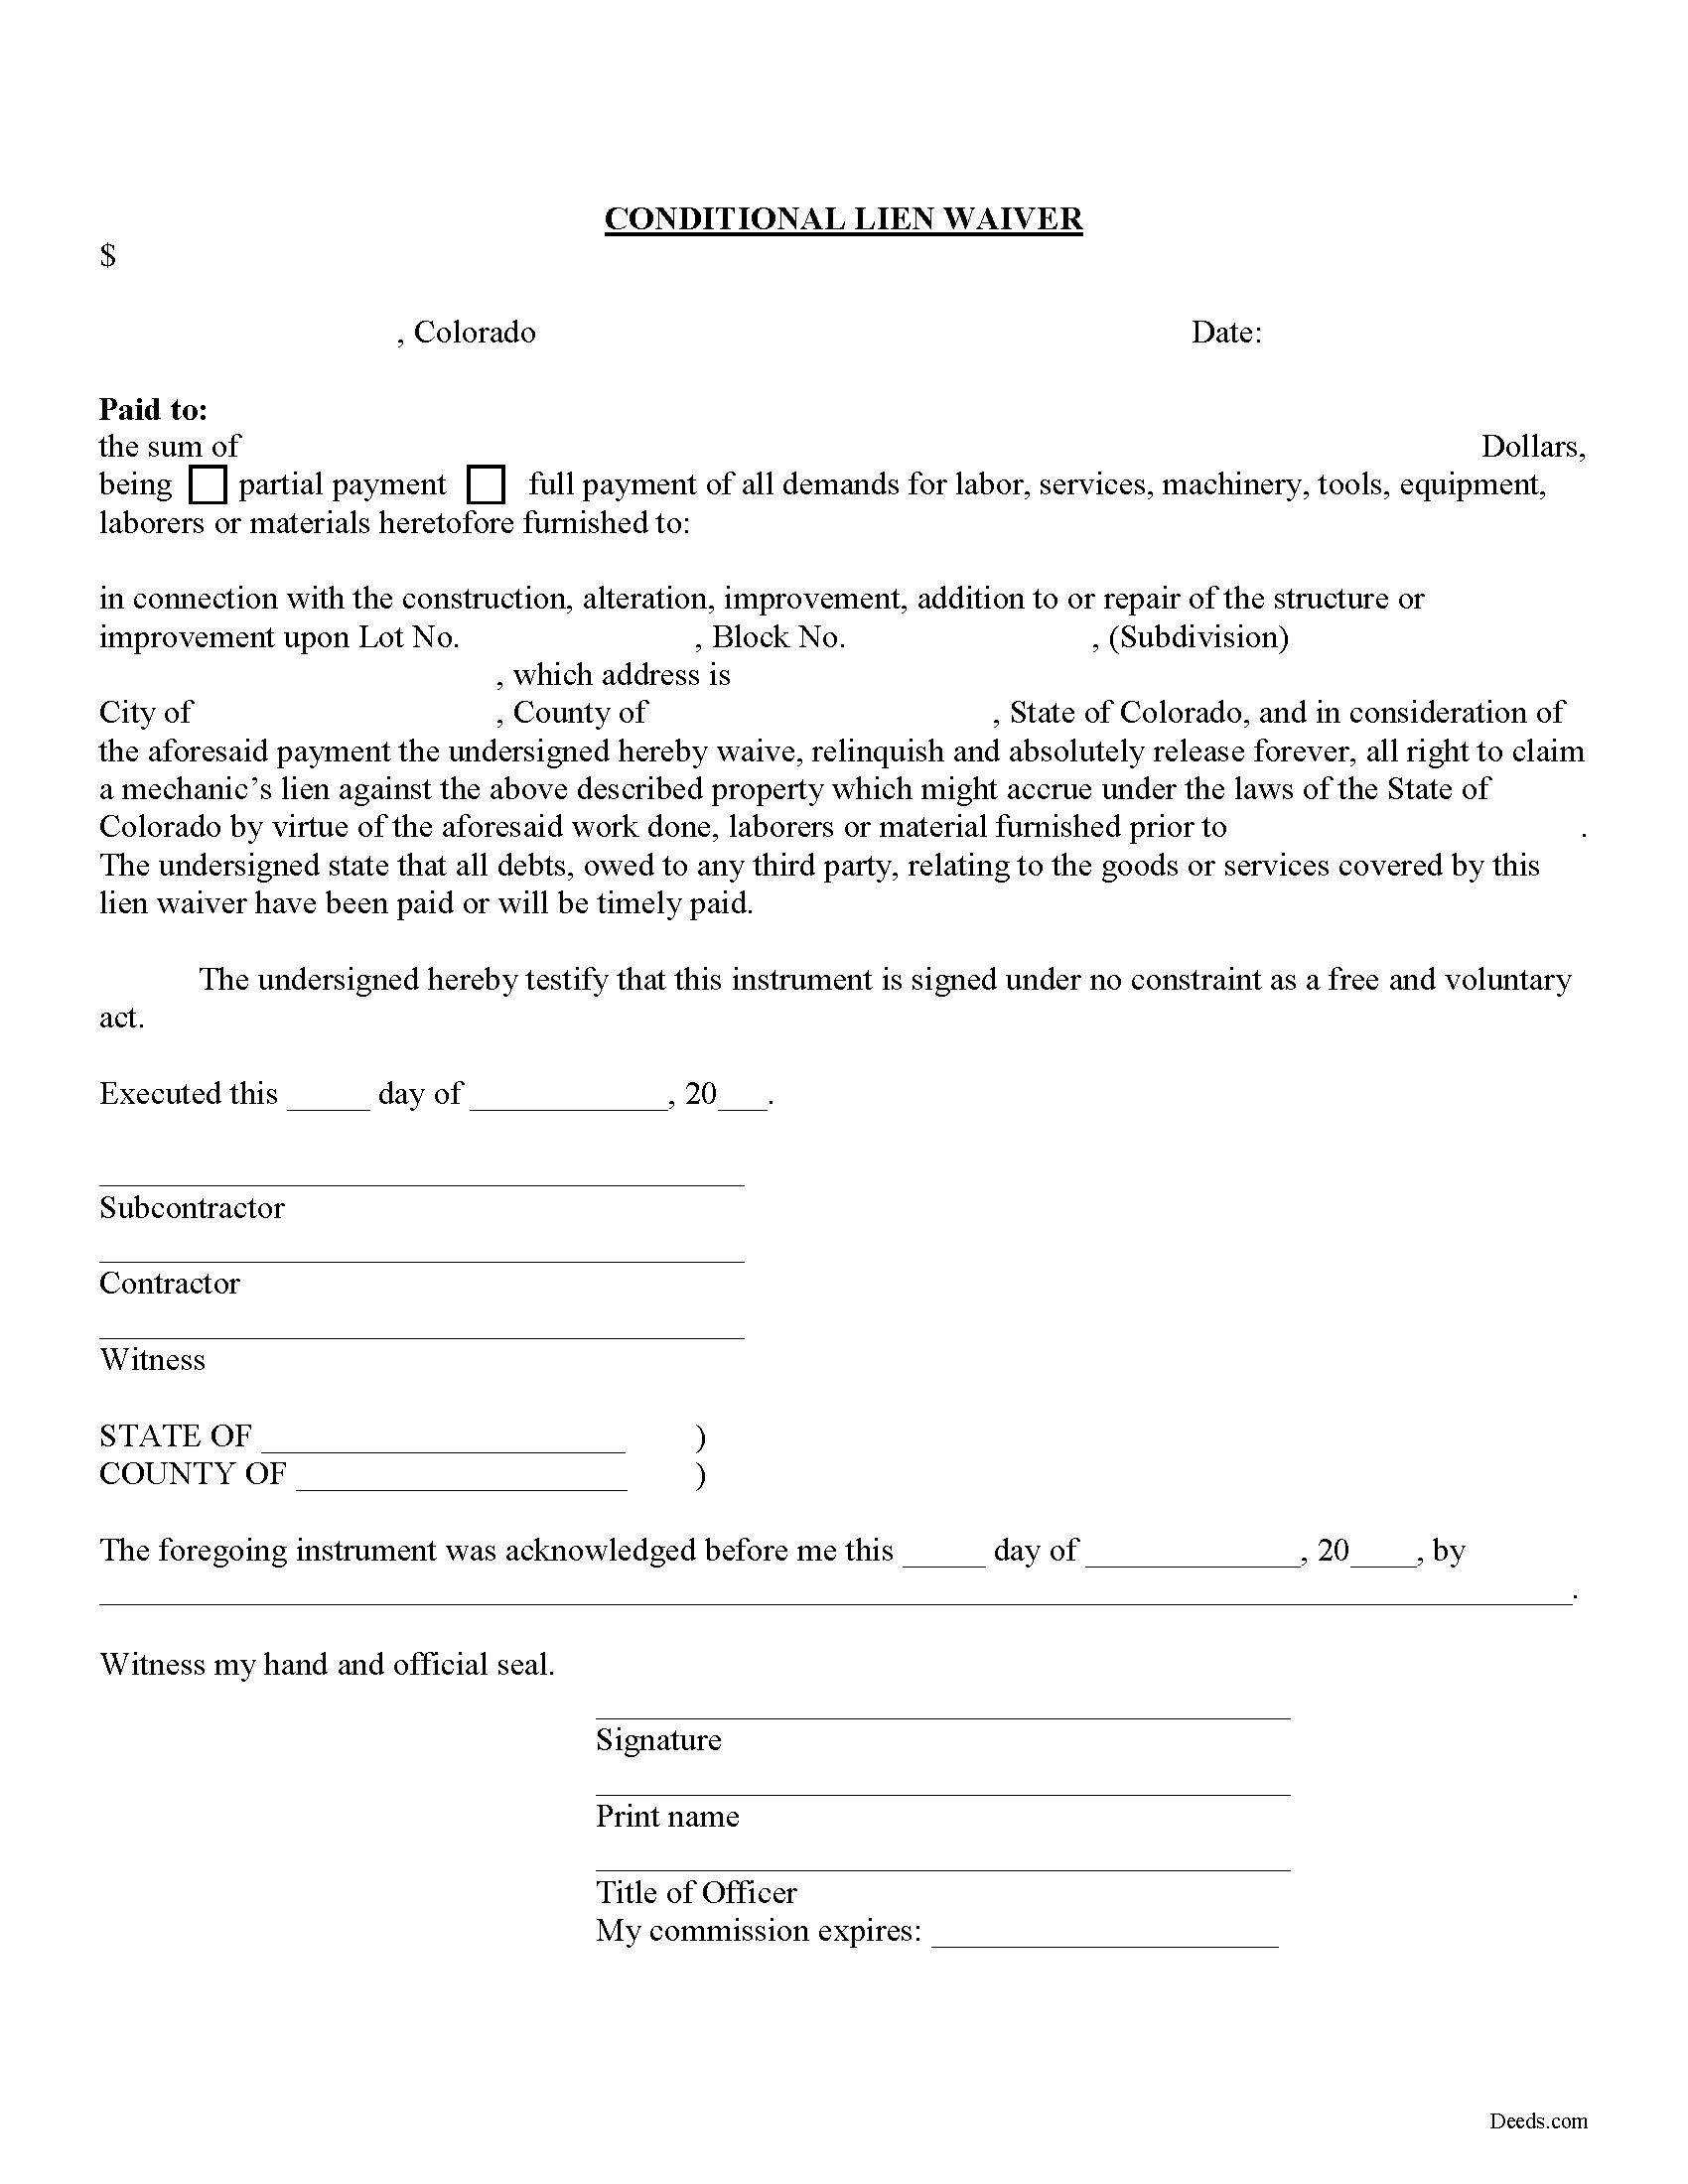 Conditional Lien Waiver